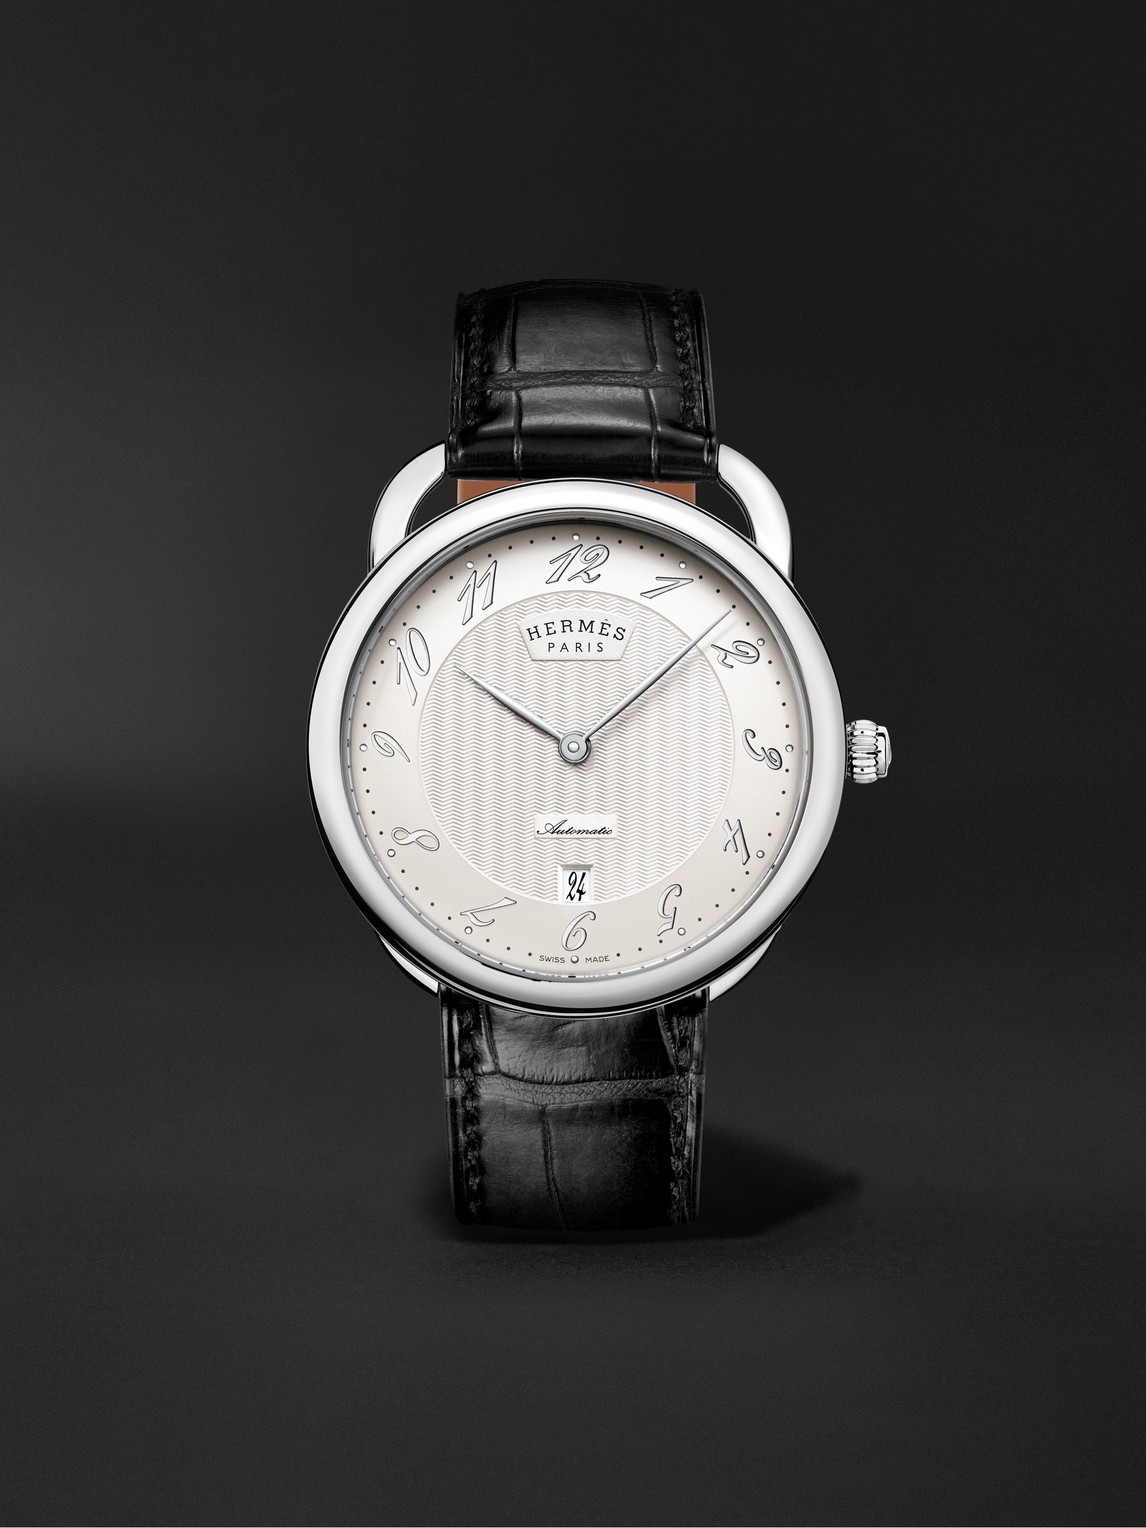 Hermès Timepieces Arceau Automatic 40mm Stainless Steel And Alligator Watch, Ref. No. 055574ww00 In White